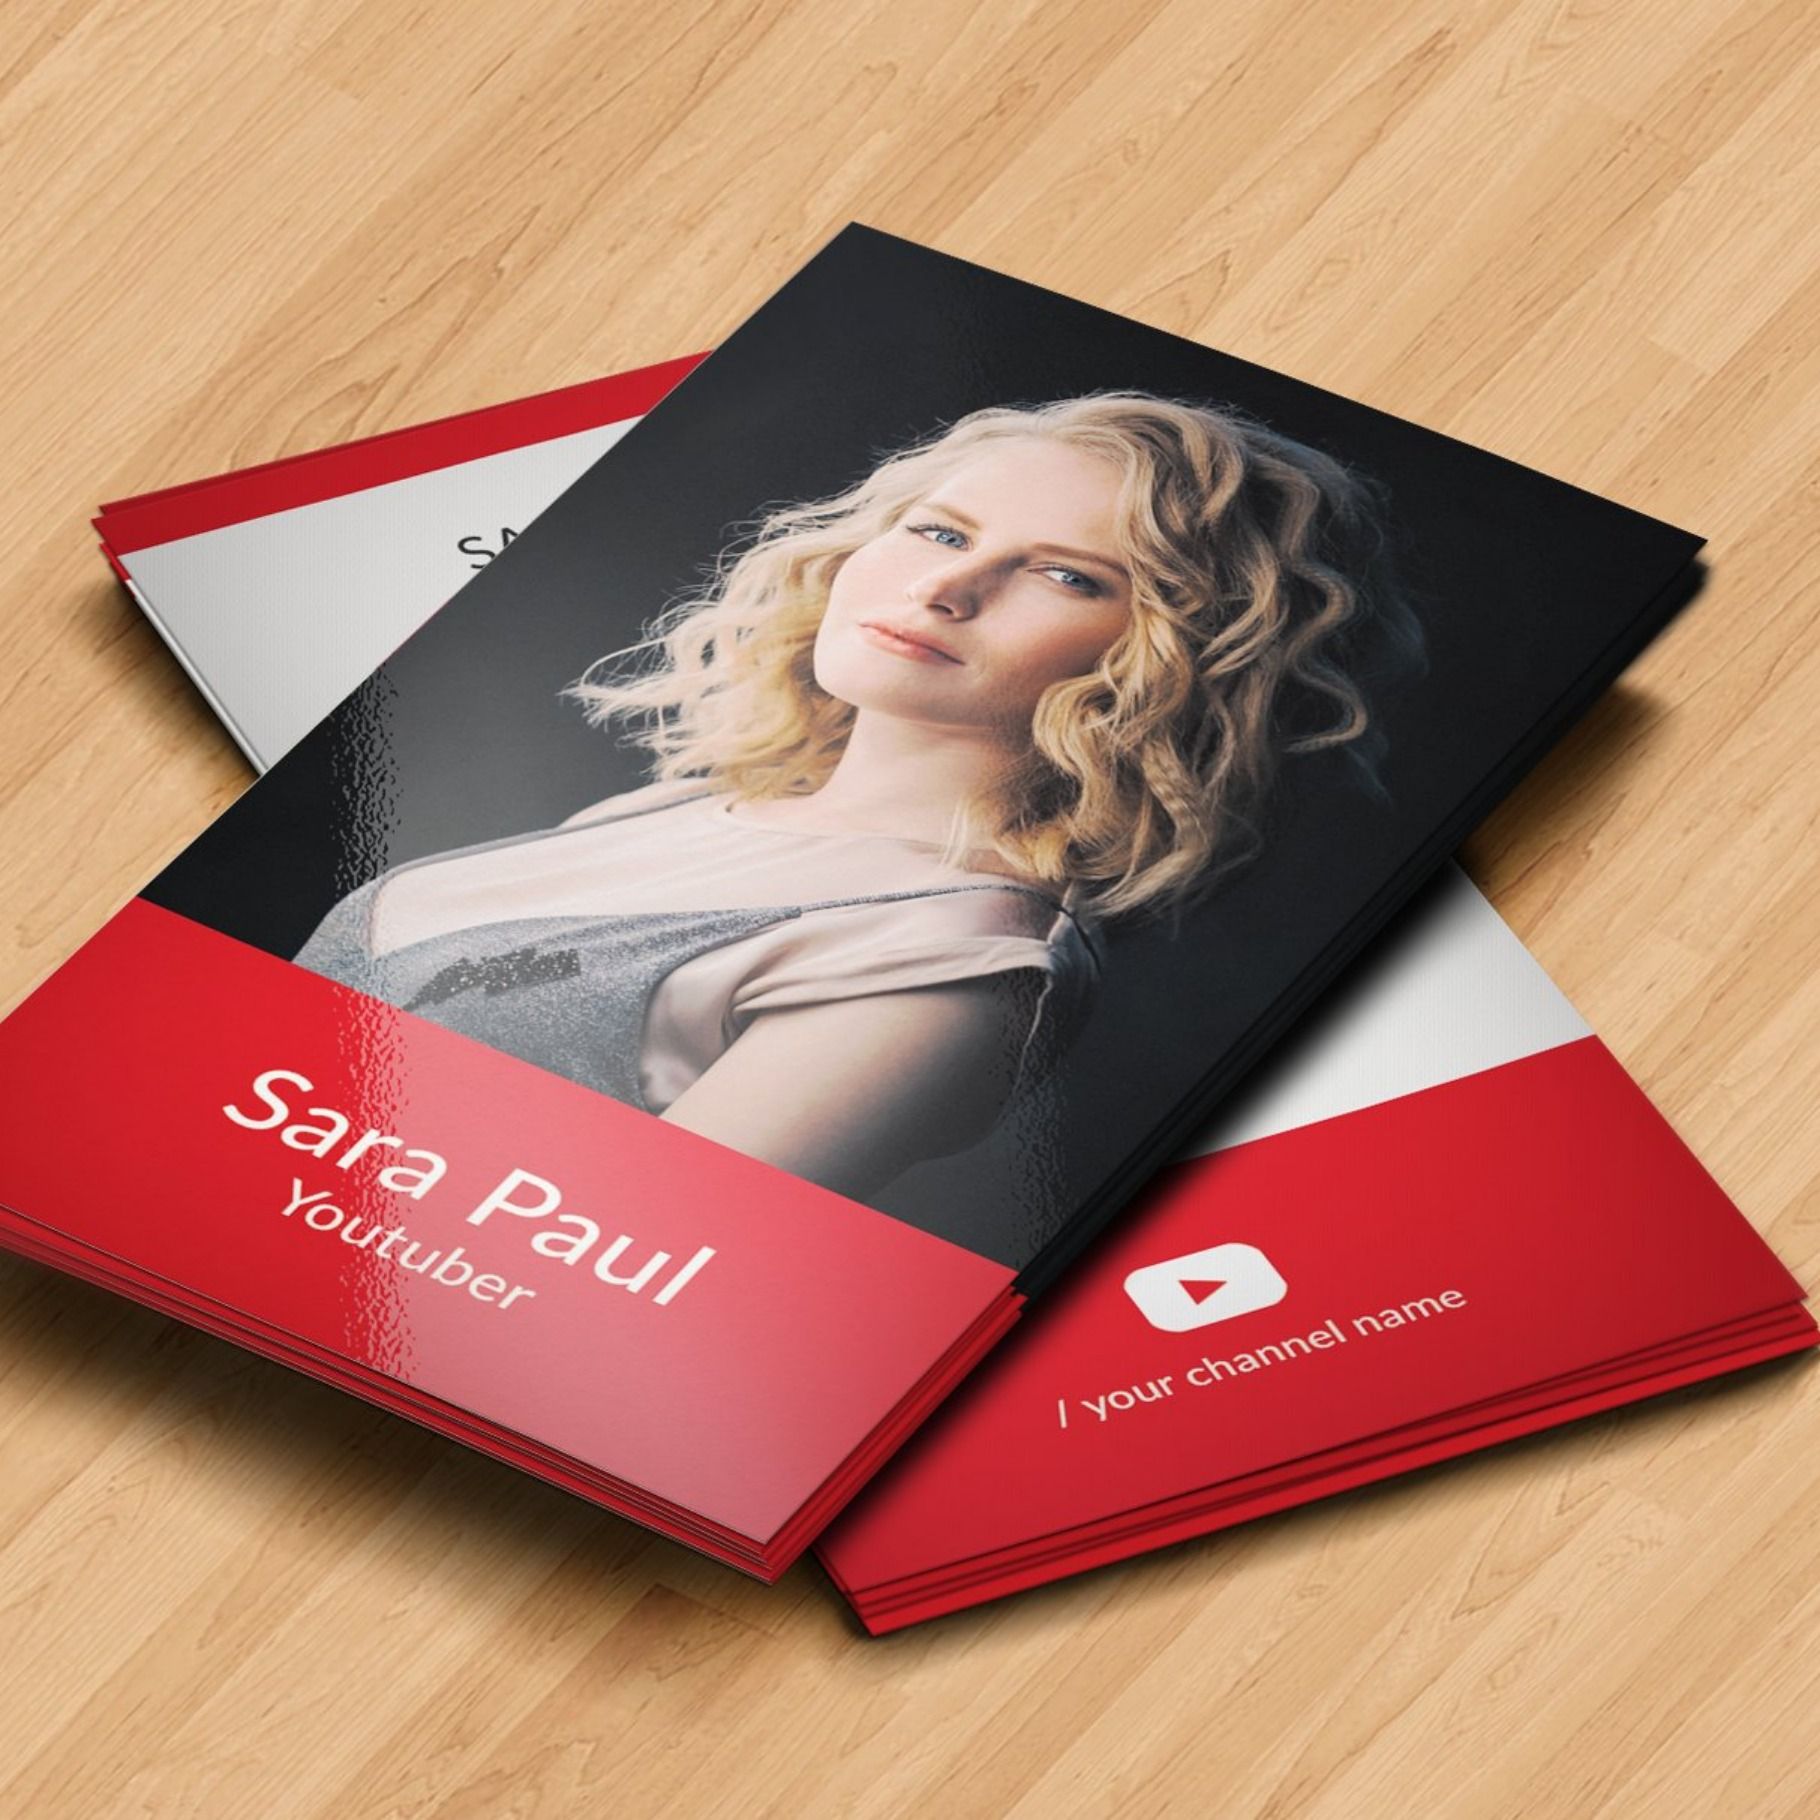 youtube channel business cards 2